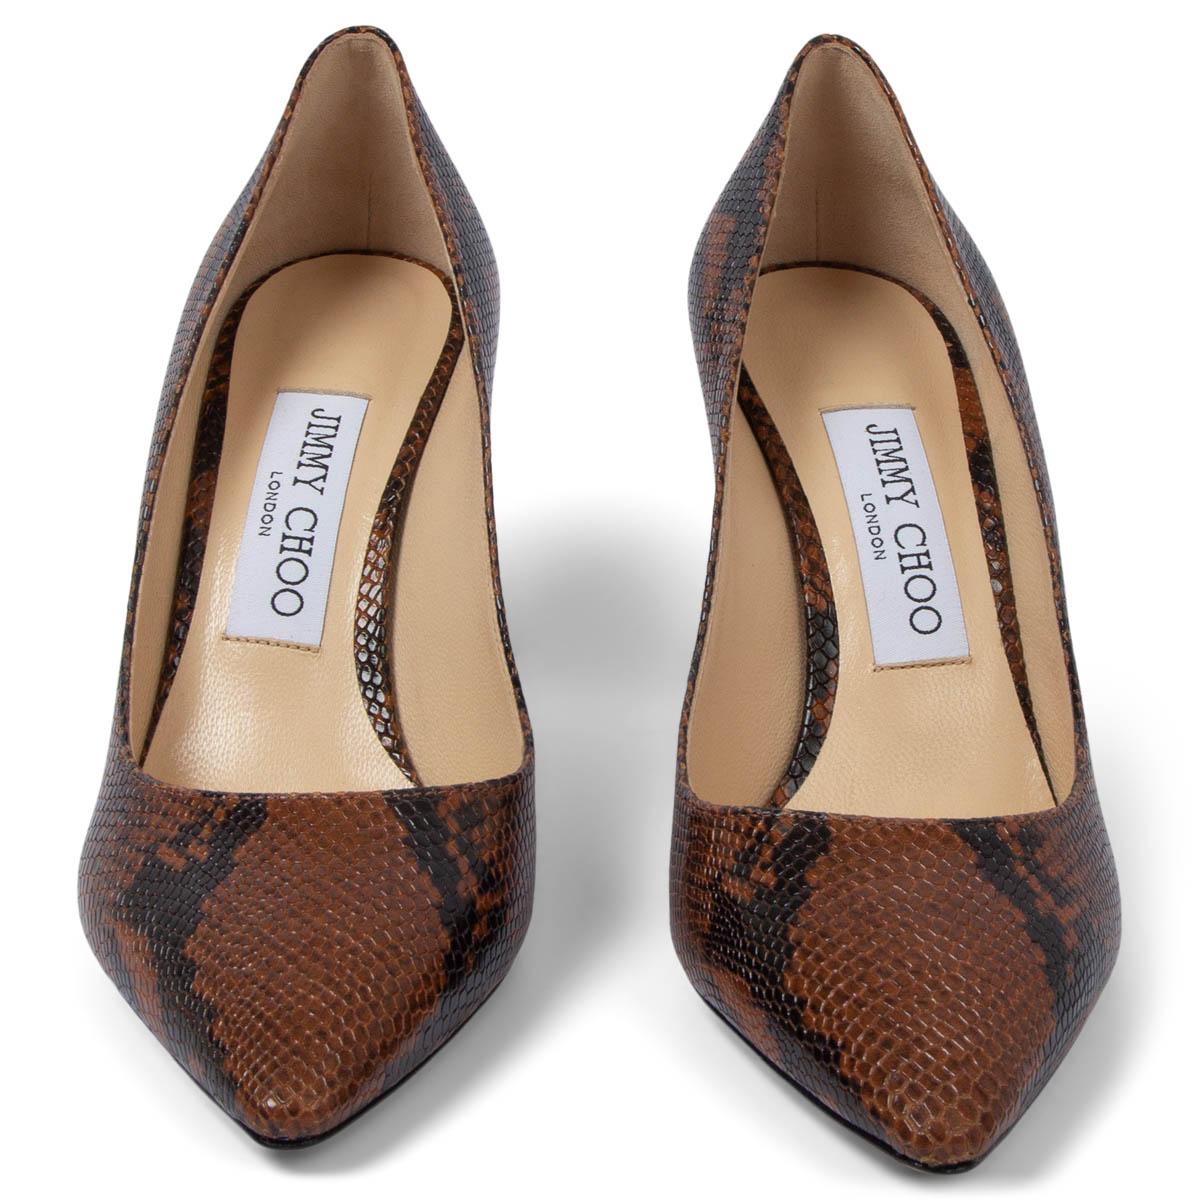 100% authentic Jimmy Choo Romy 85 brown and espresso brown snakeskin embossed calfskin pointed-toe pumps. Brand new. Come with dust bag. 

Measurements
Imprinted Size	36.5
Shoe Size	36.5
Inside Sole	24.5cm (9.6in)
Width	7cm (2.7in)
Heel	8cm